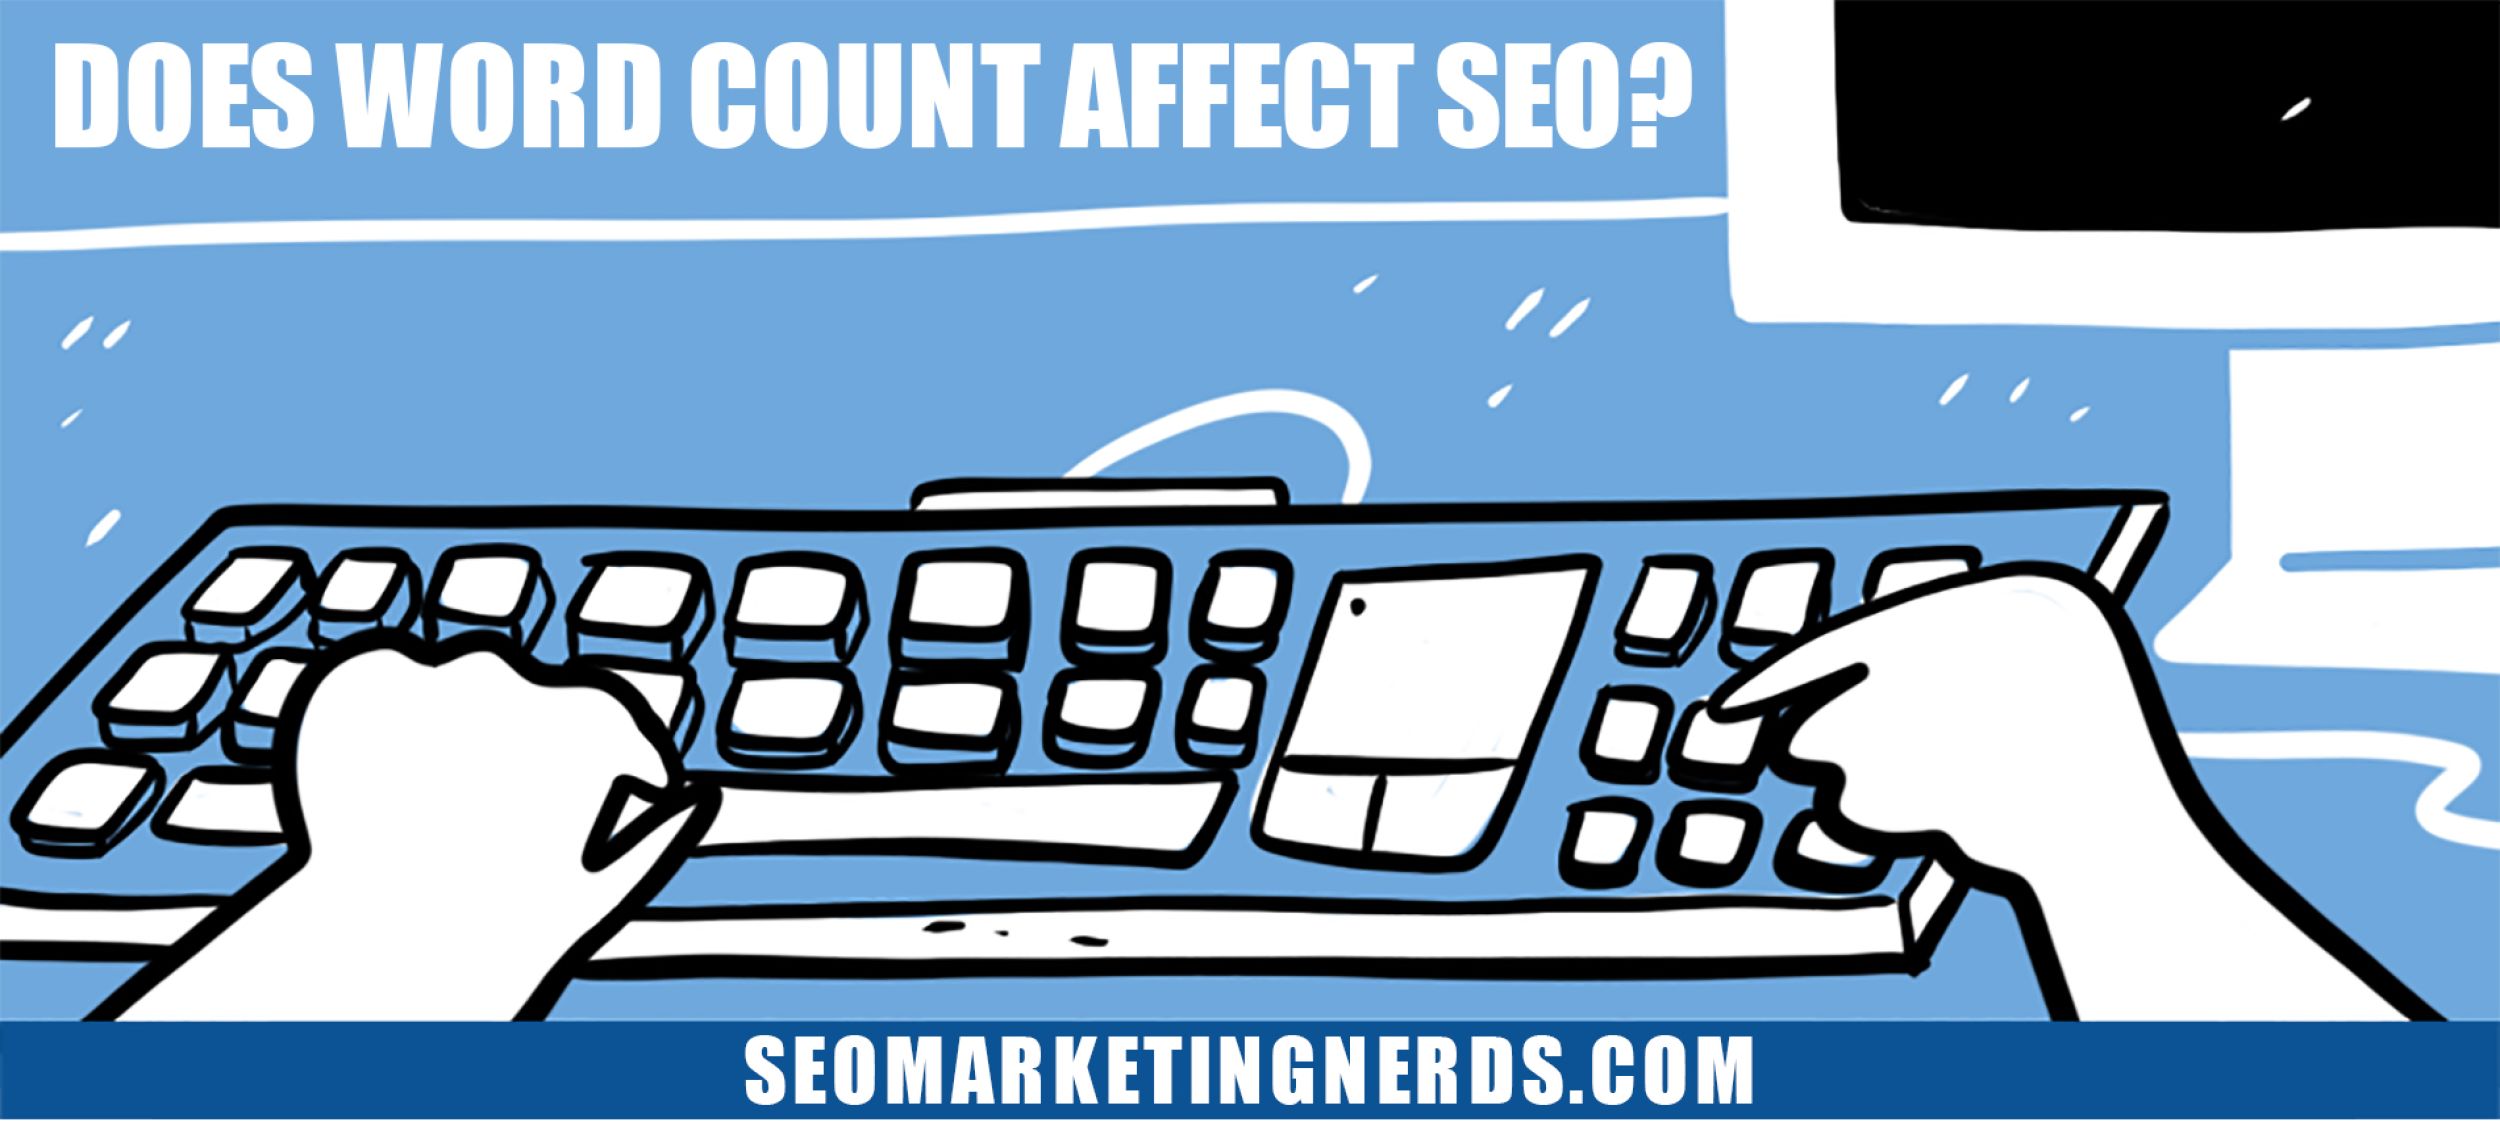 Does word count affect SEO?